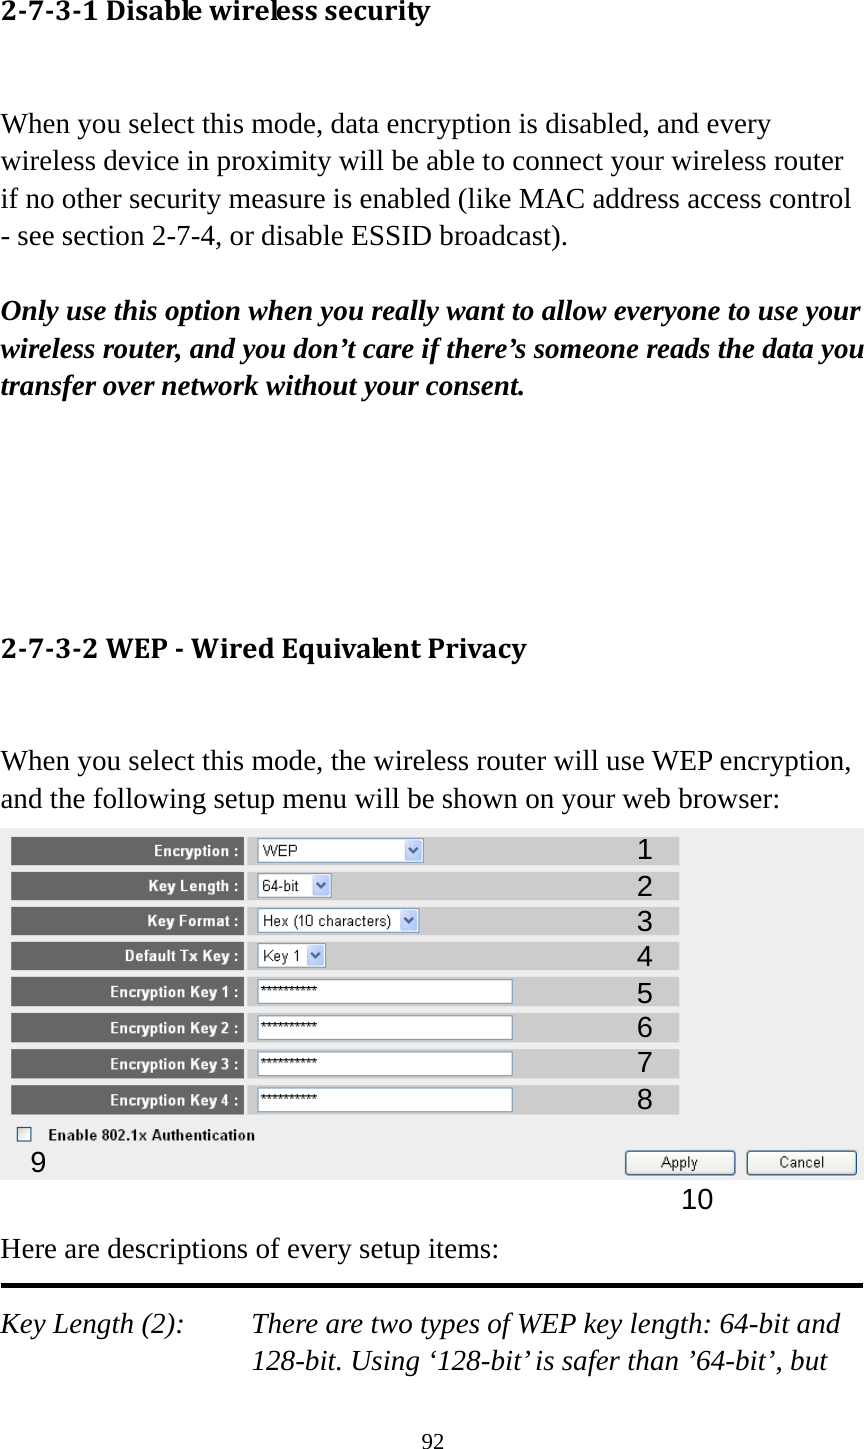 92 2731Disablewirelesssecurity When you select this mode, data encryption is disabled, and every wireless device in proximity will be able to connect your wireless router if no other security measure is enabled (like MAC address access control - see section 2-7-4, or disable ESSID broadcast).    Only use this option when you really want to allow everyone to use your wireless router, and you don’t care if there’s someone reads the data you transfer over network without your consent.      2732WEPWiredEquivalentPrivacy When you select this mode, the wireless router will use WEP encryption, and the following setup menu will be shown on your web browser:   Here are descriptions of every setup items:  Key Length (2):    There are two types of WEP key length: 64-bit and 128-bit. Using ‘128-bit’ is safer than ’64-bit’, but 123 5 7 6 9 4 8 10 